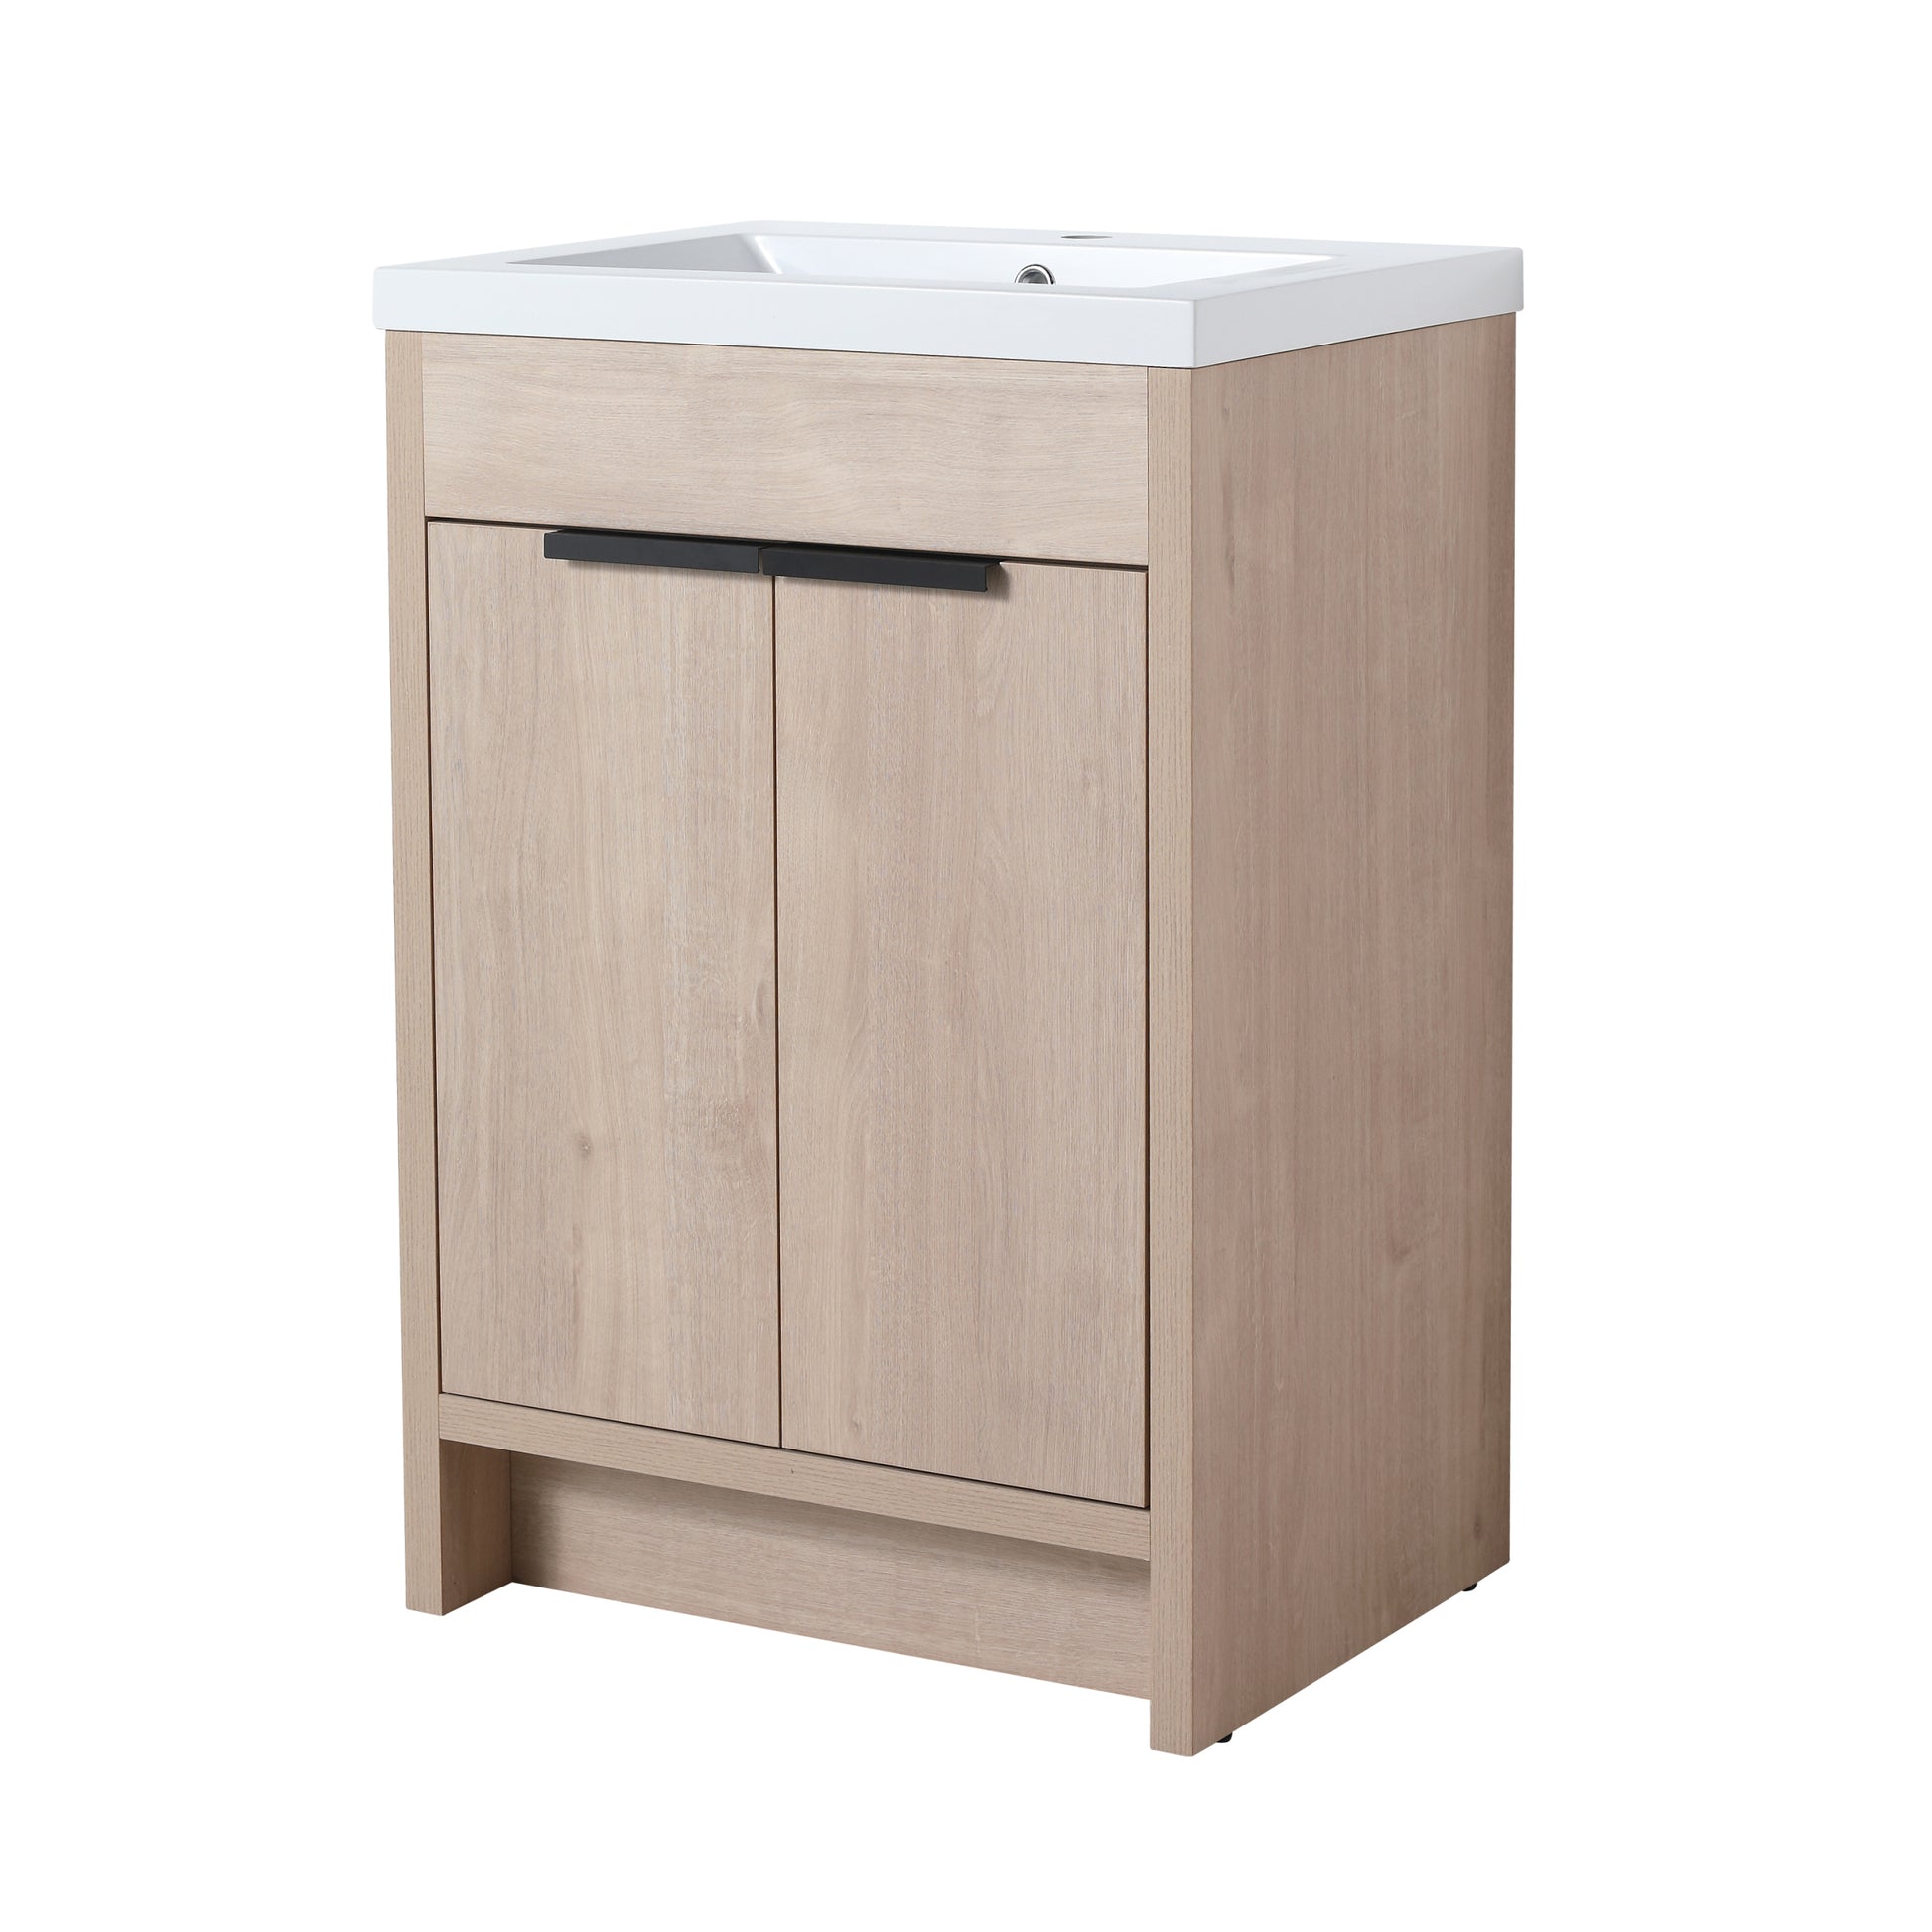 KD PACKING 24 Inch Freestanding Bathroom Vanity With plain light